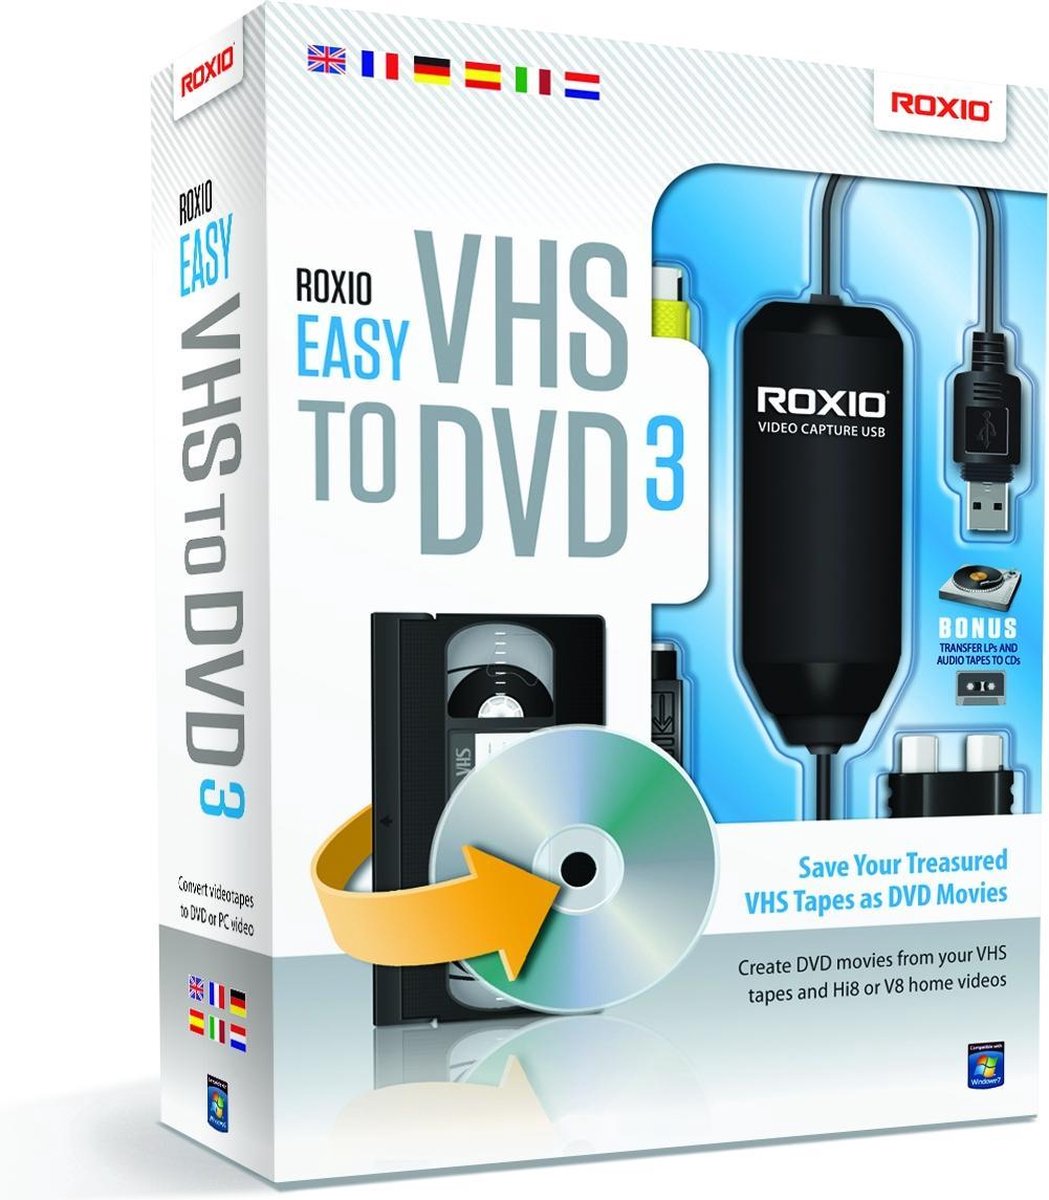 roxio easy vhs to dvd 3 torrent